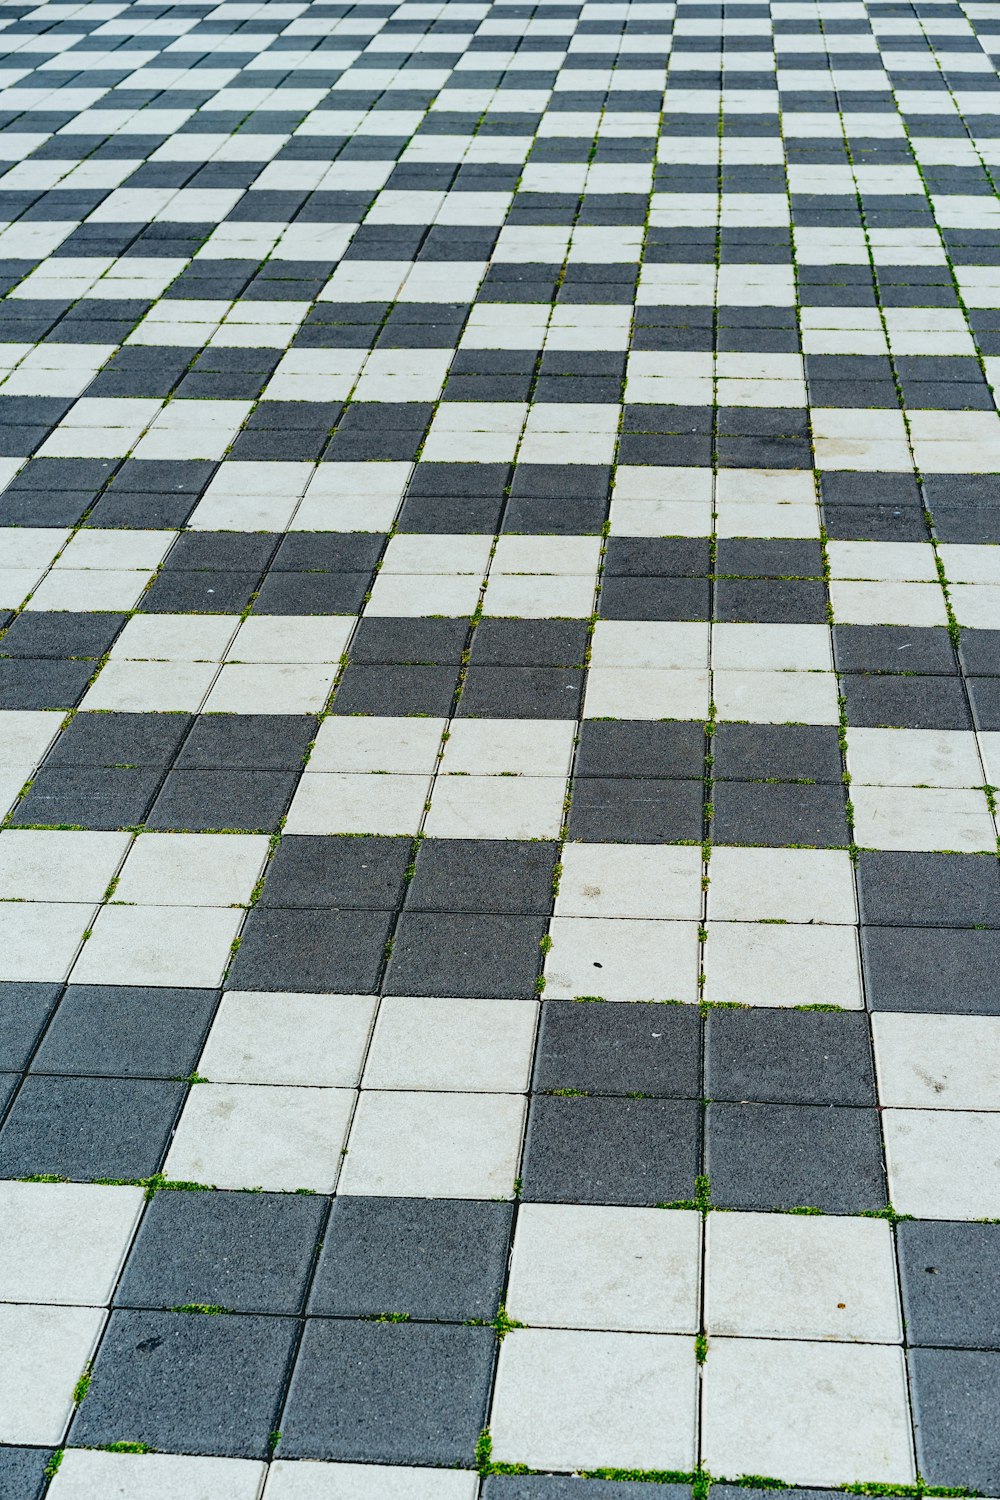 Checkered Floor Pictures Download Free Images On Unsplash